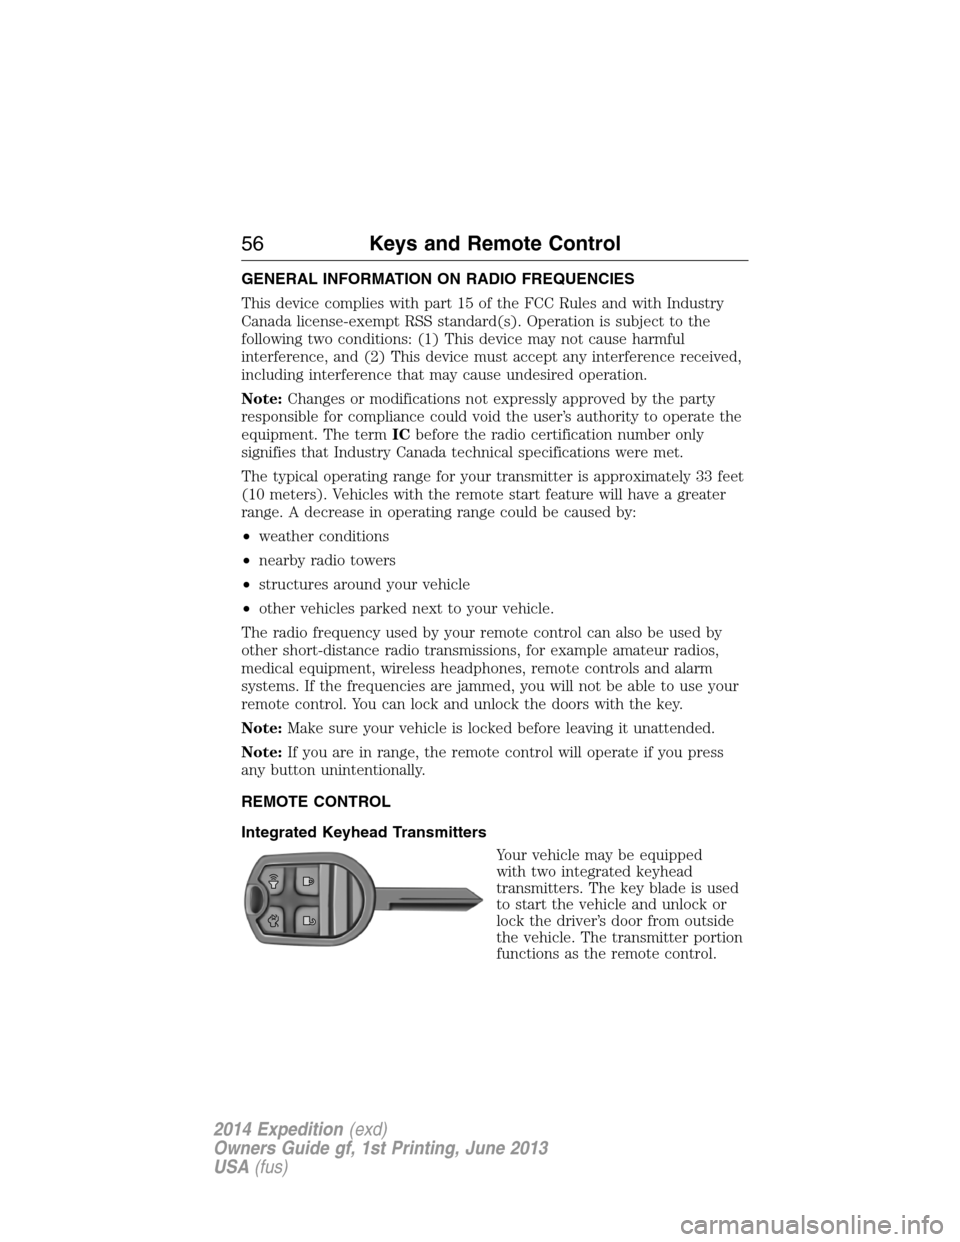 FORD EXPEDITION 2014 3.G Owners Manual GENERAL INFORMATION ON RADIO FREQUENCIES
This device complies with part 15 of the FCC Rules and with Industry
Canada license-exempt RSS standard(s). Operation is subject to the
following two condition